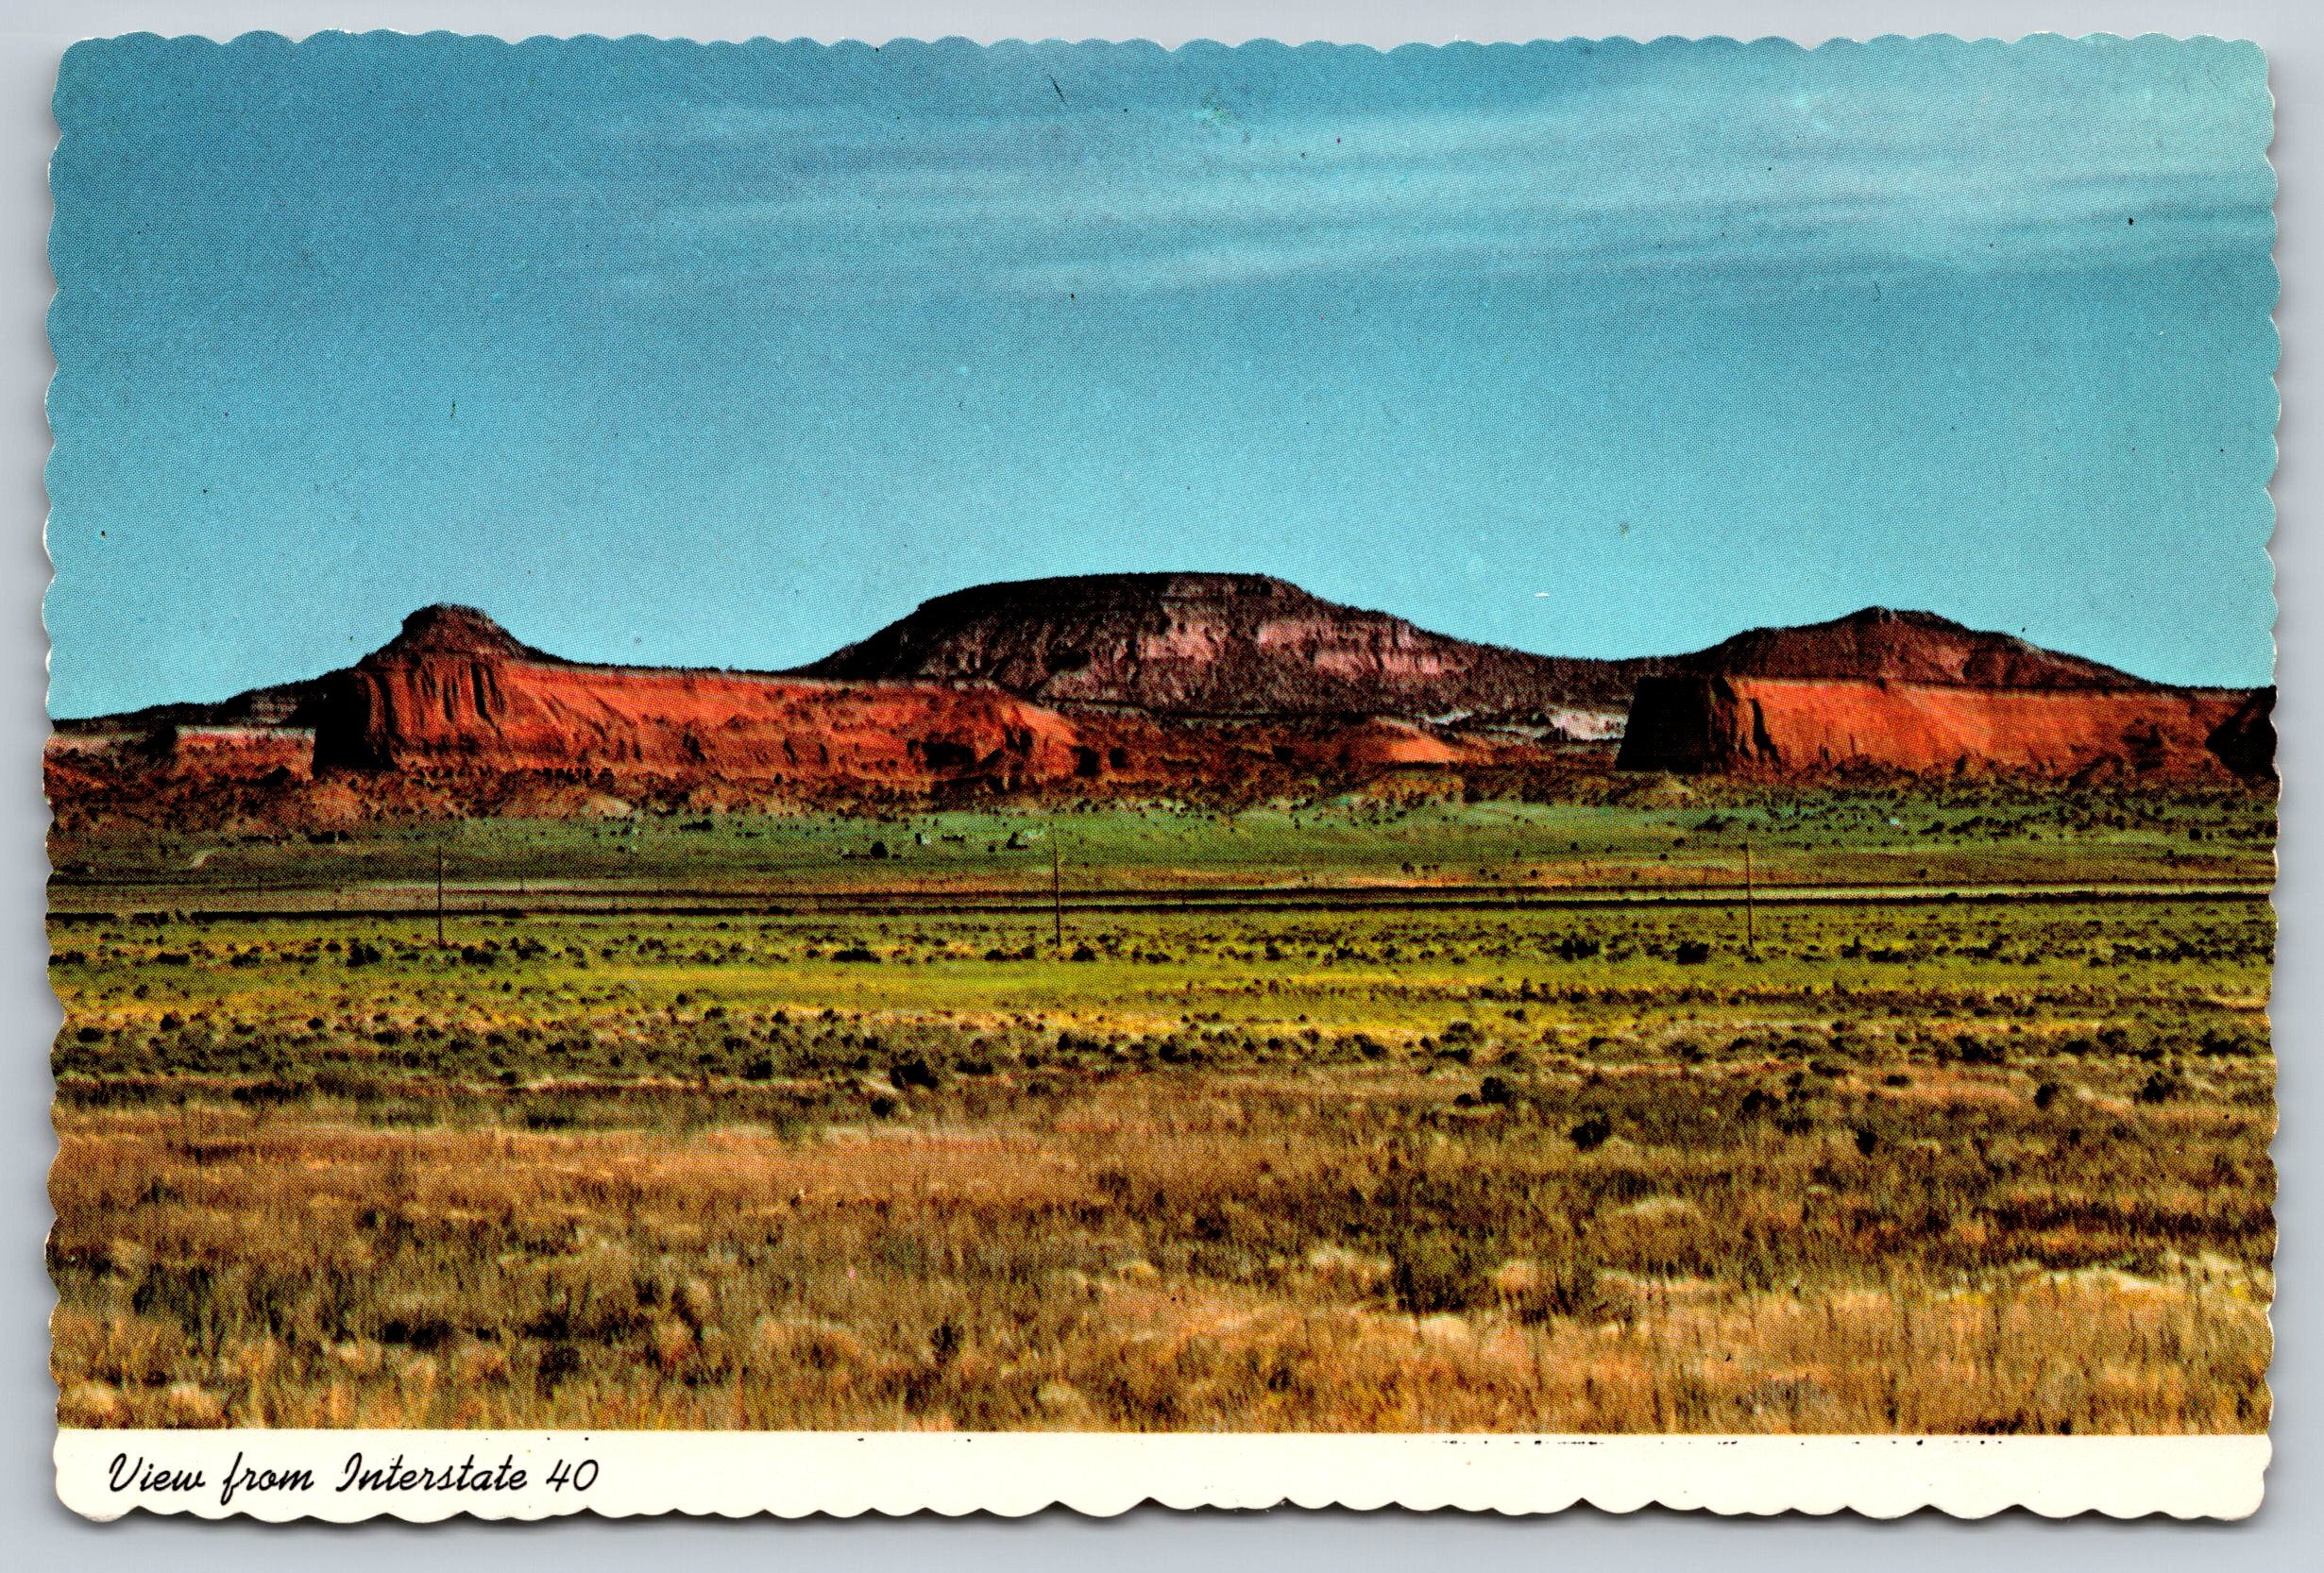 Western New Mexico, Interstate 40, Vintage Post Card